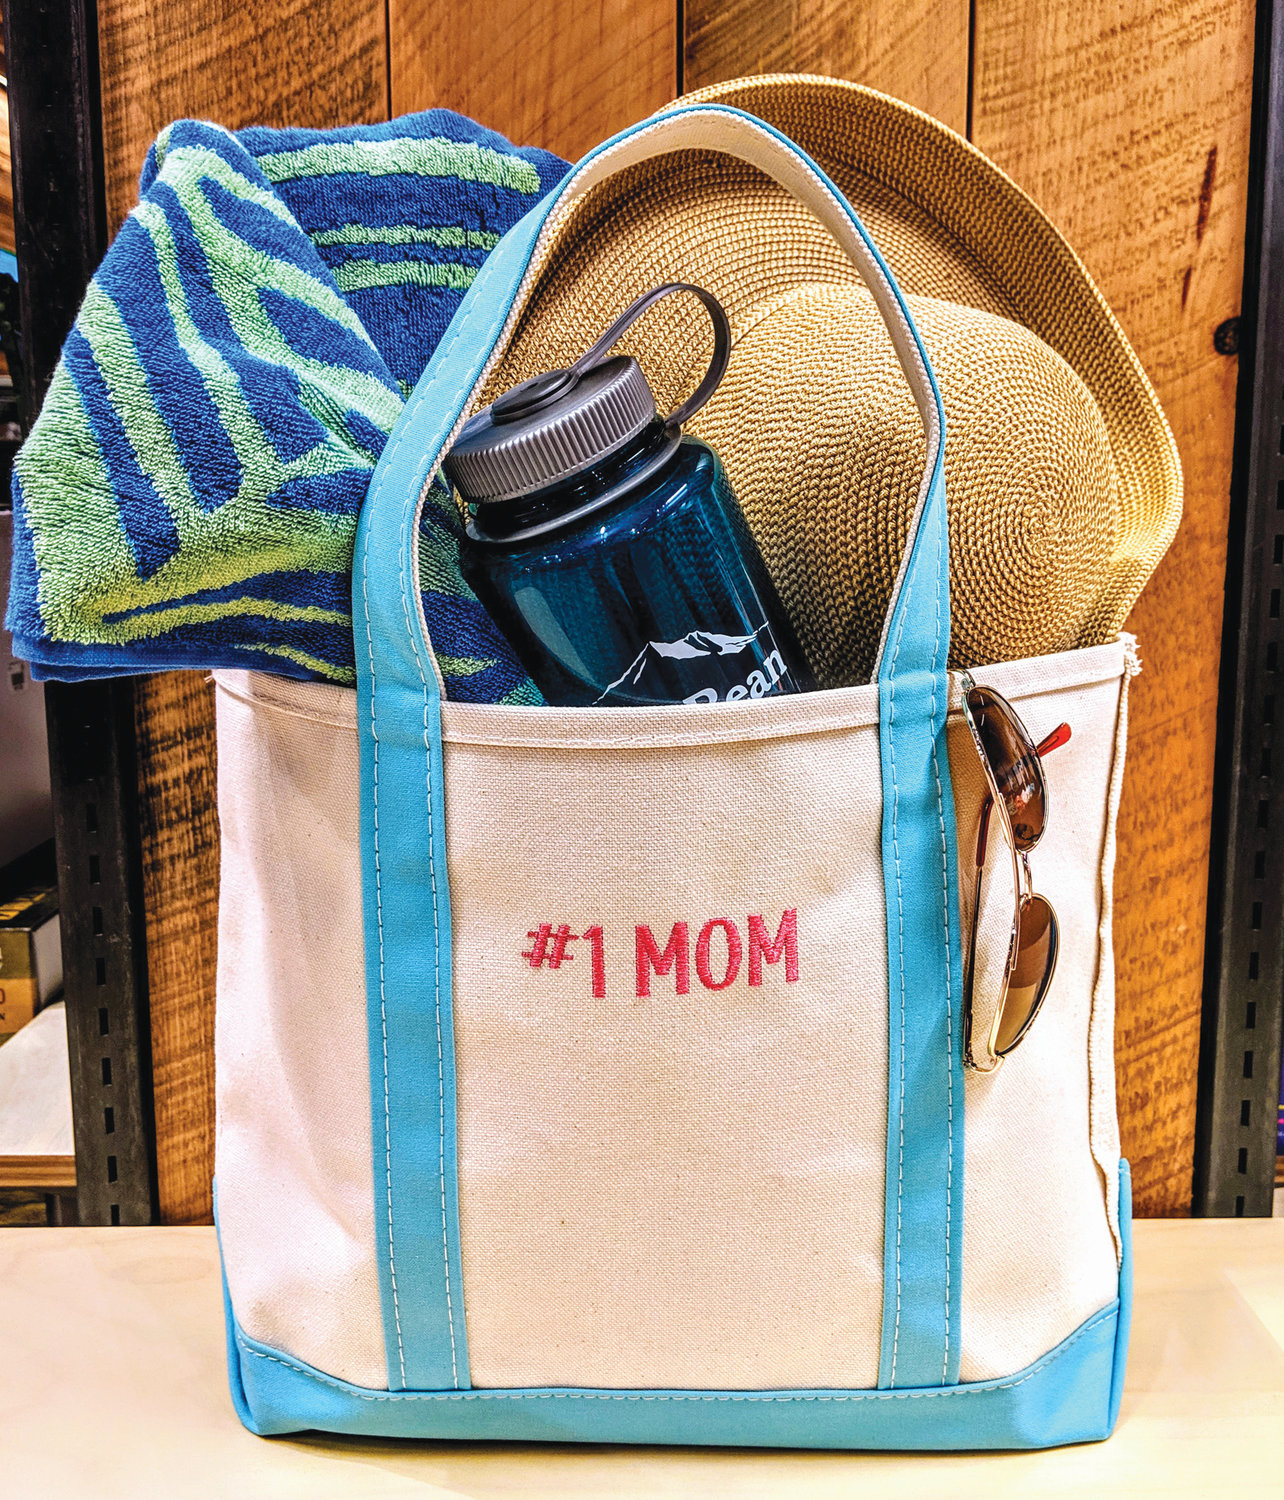 Popular Mother's Day gifts include Yankee Candle's personalized photo candle, engraved jewelry from Providence Diamond Company and the monogrammed tote from L.L. Bean.